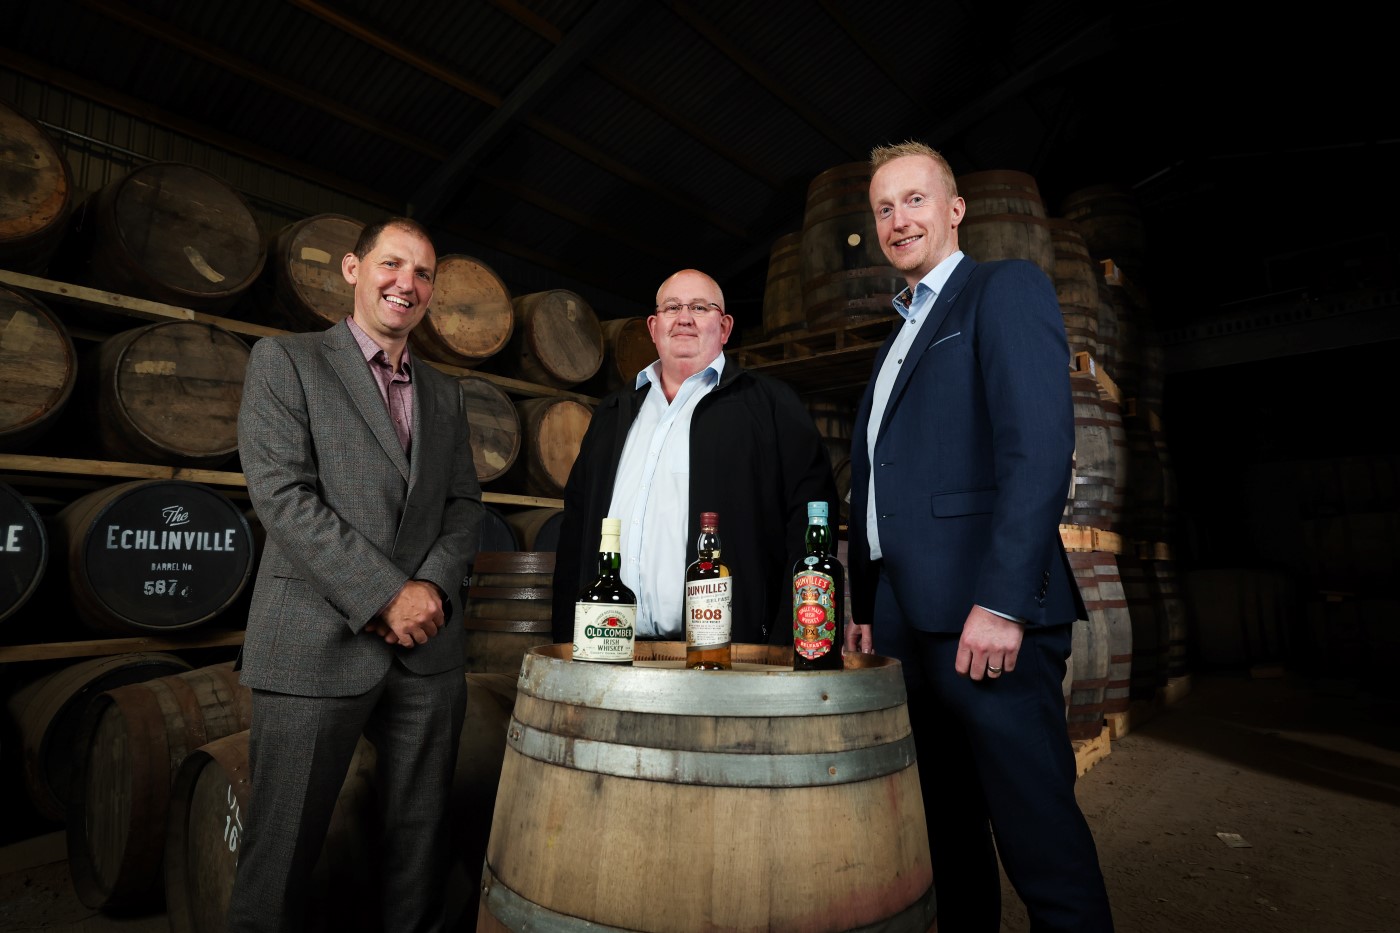 rom left Gavin North, senior business manager, Bank of Ireland UK, Shane Braniff, owner, The Echlinville Distillery and Niall Devlin, head of business banking, Bank of Ireland UK